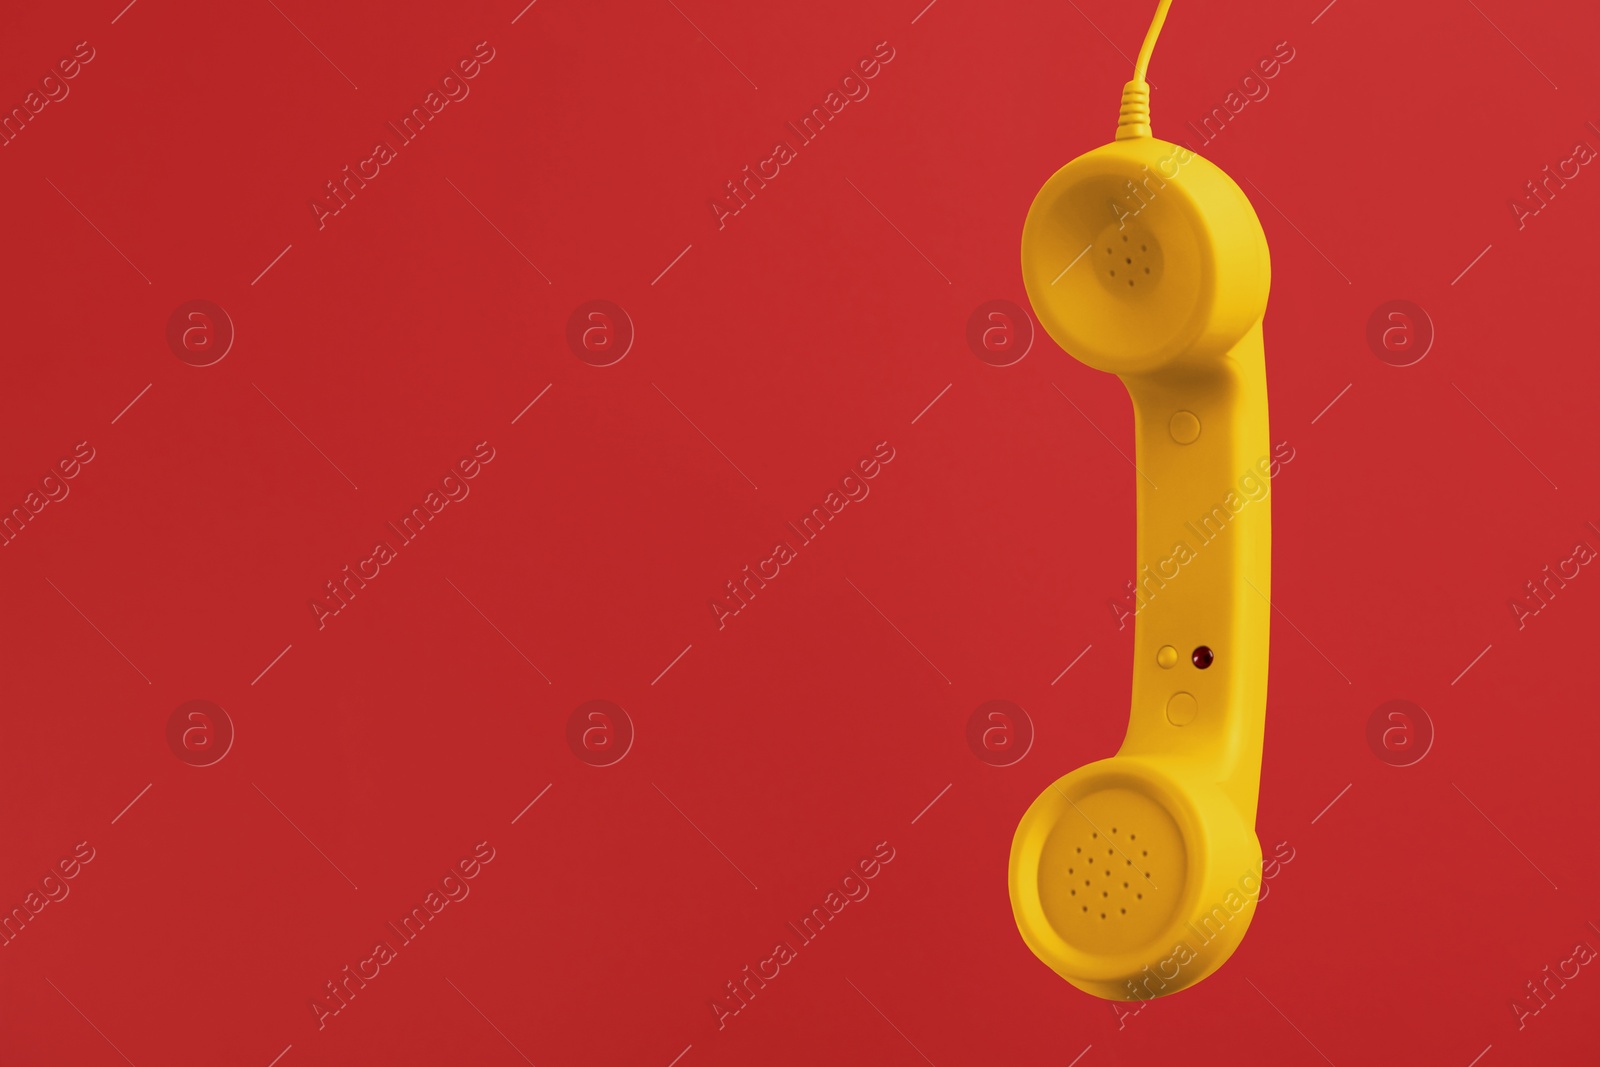 Image of Yellow telephone handset hanging on red background. Space for text